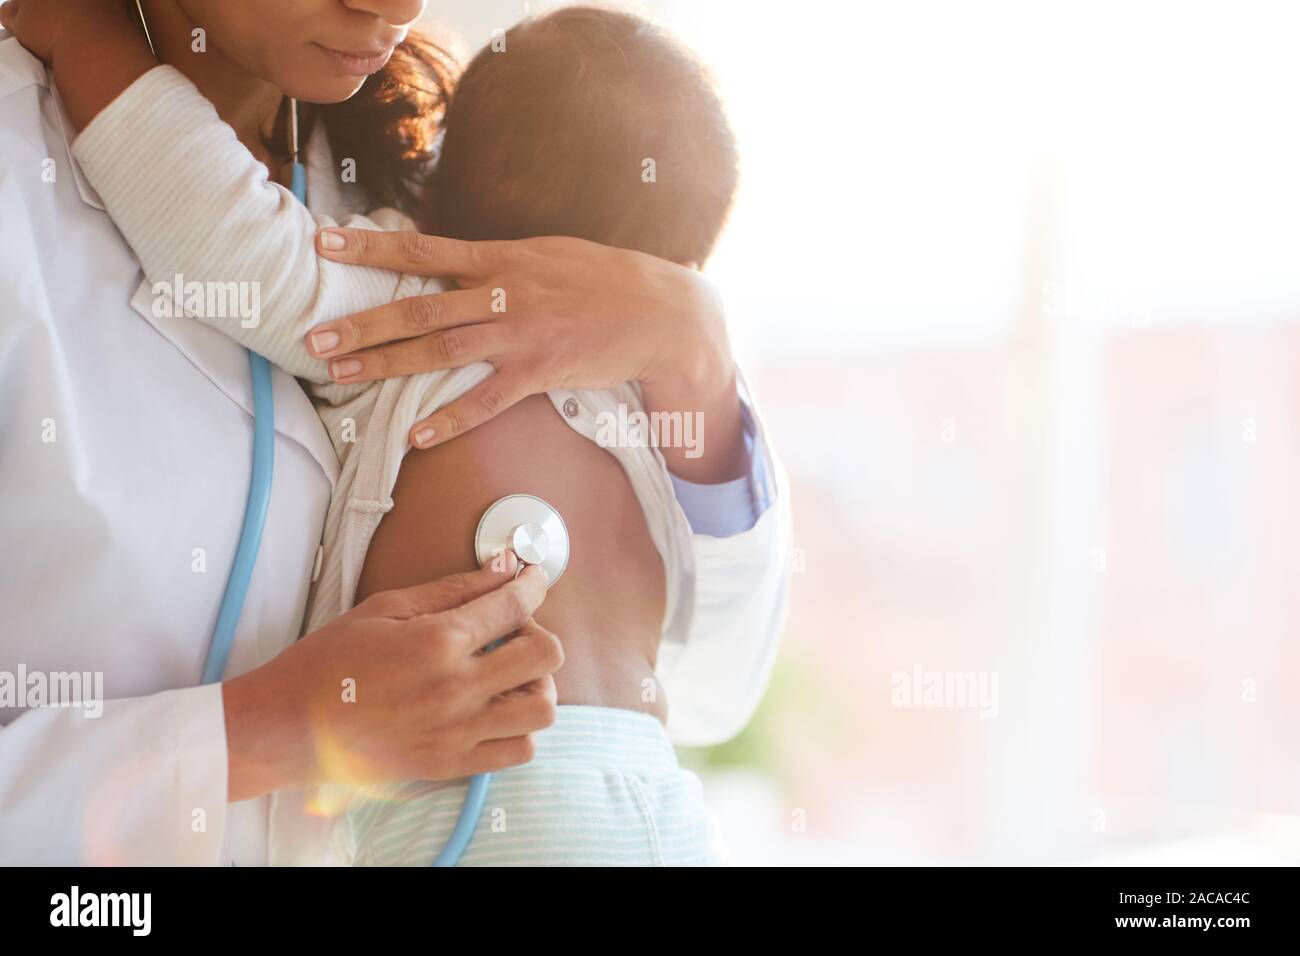 Doctor holding baby and listening to him with stethoscope Stock Photo